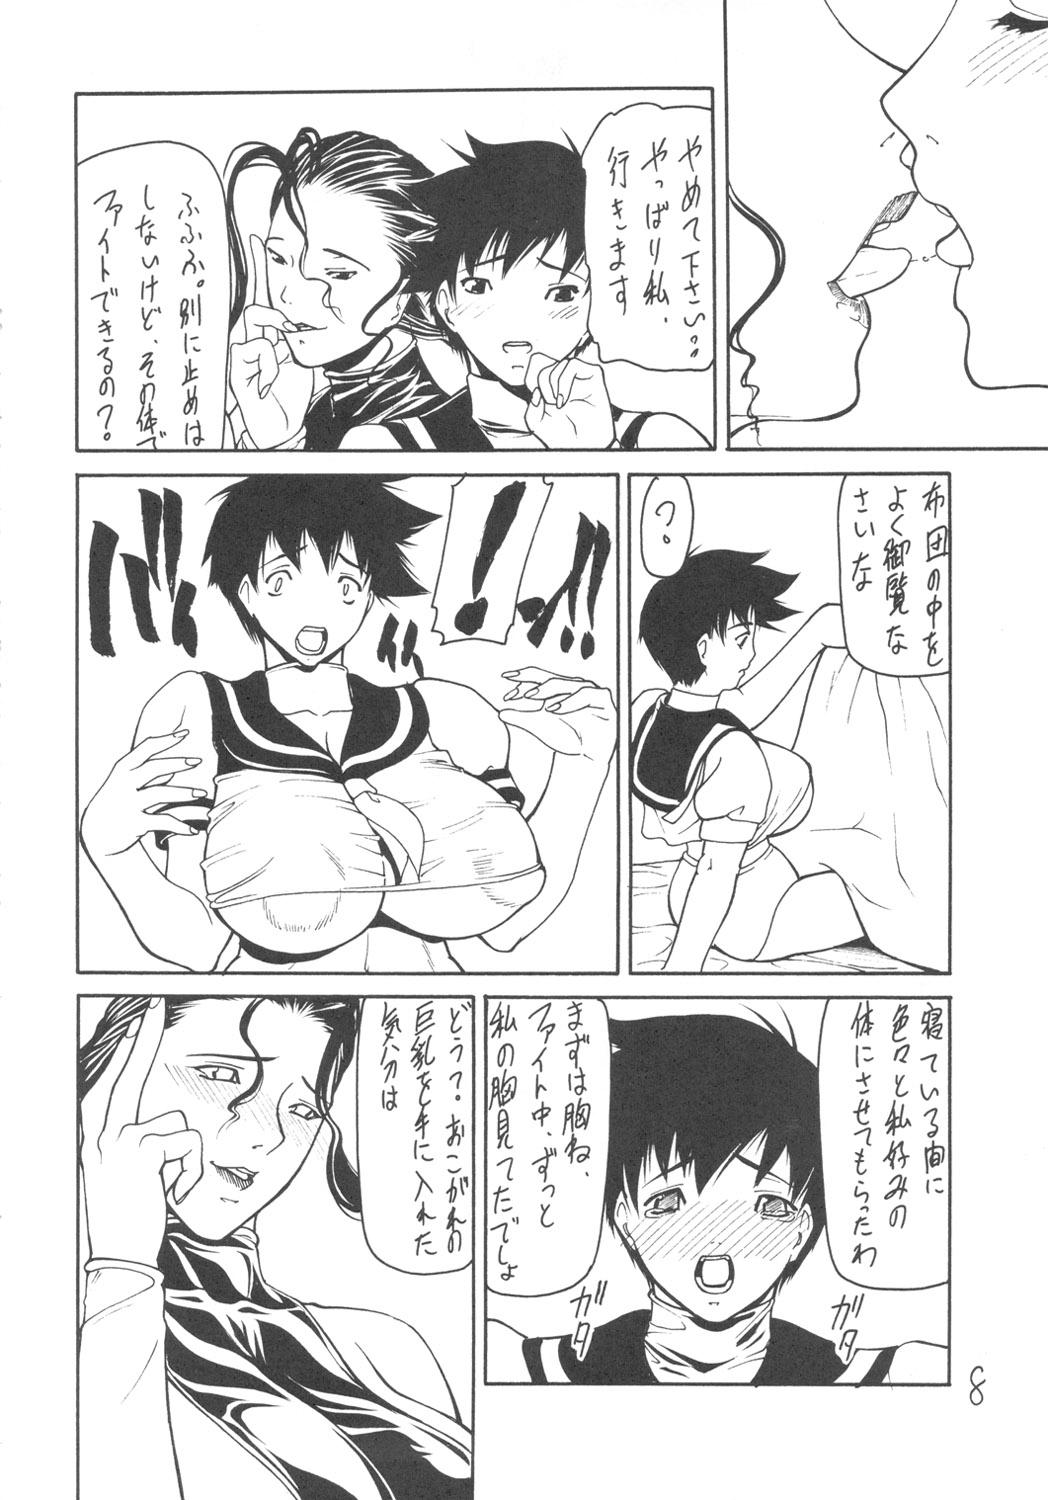 Fuck Pussy Giroutei "Ho" no Maki - Street fighter Rimjob - Page 6